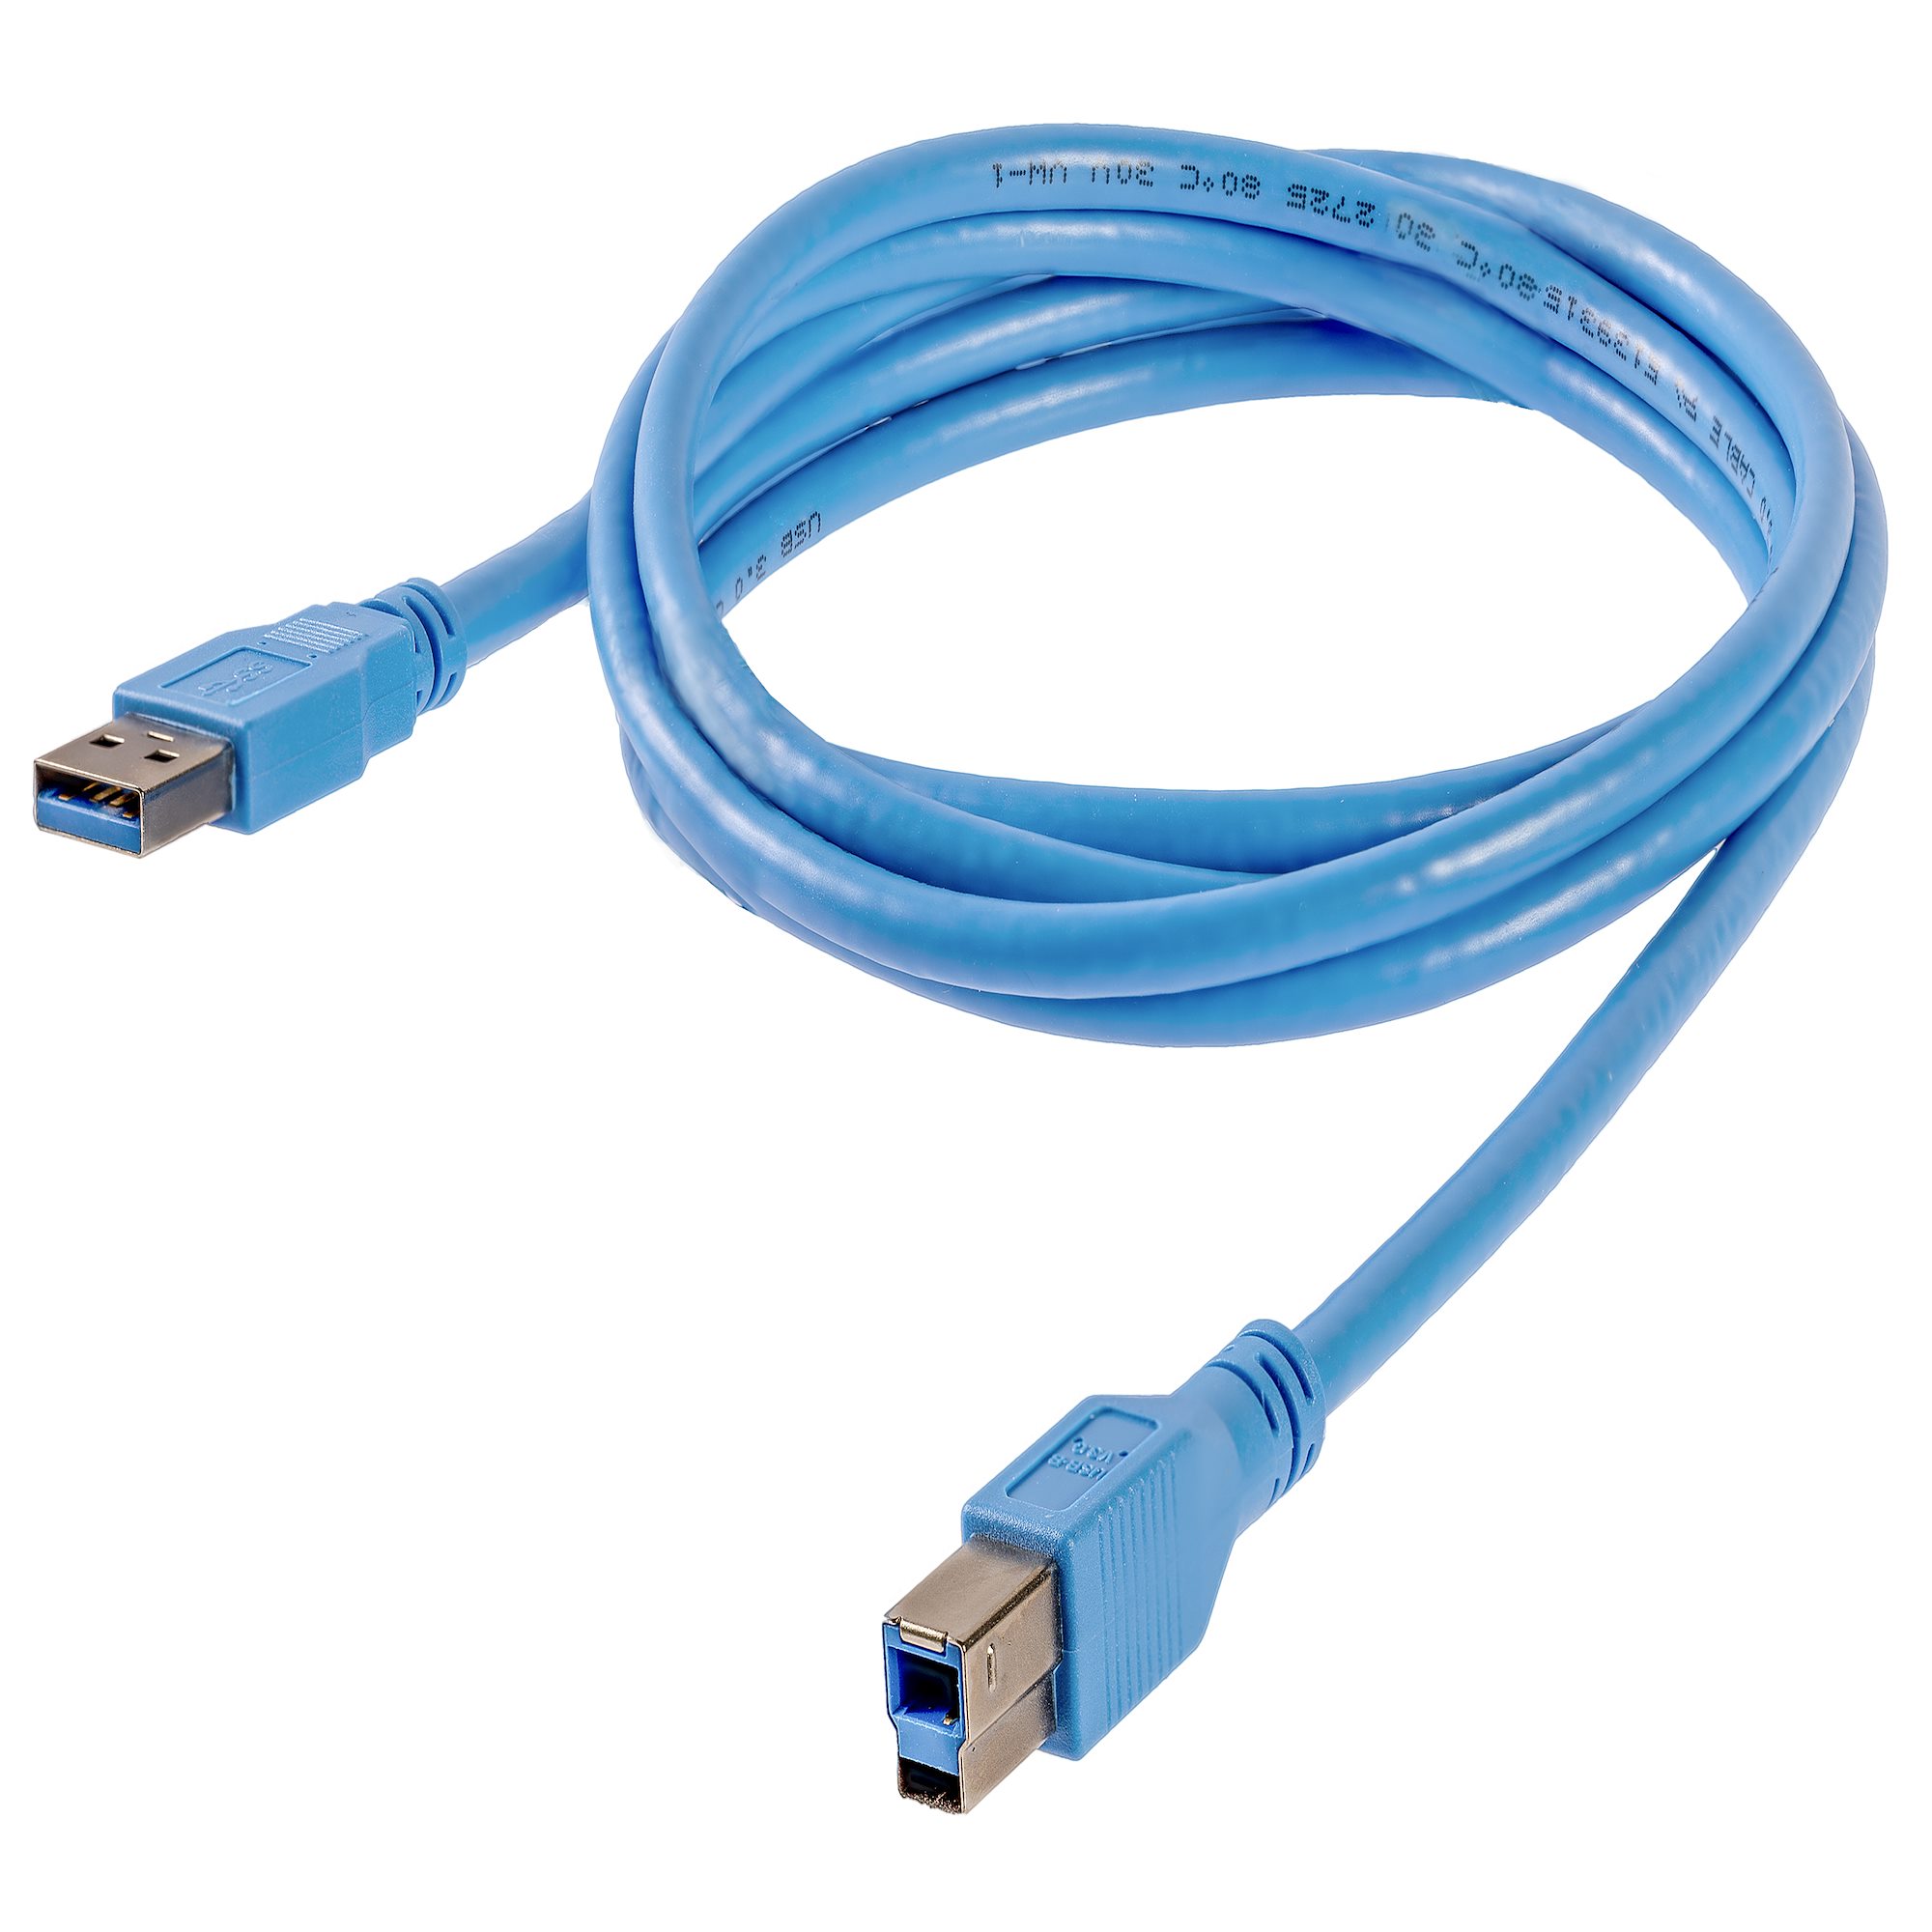  Belkin USB A to USB B Cable - 6 foot USB 3.0 Cable - SuperSpeed USB  3.0 Extension Cable - USB-A to USB-B Printer Cable - Male-to-Male USB Cable  - USB